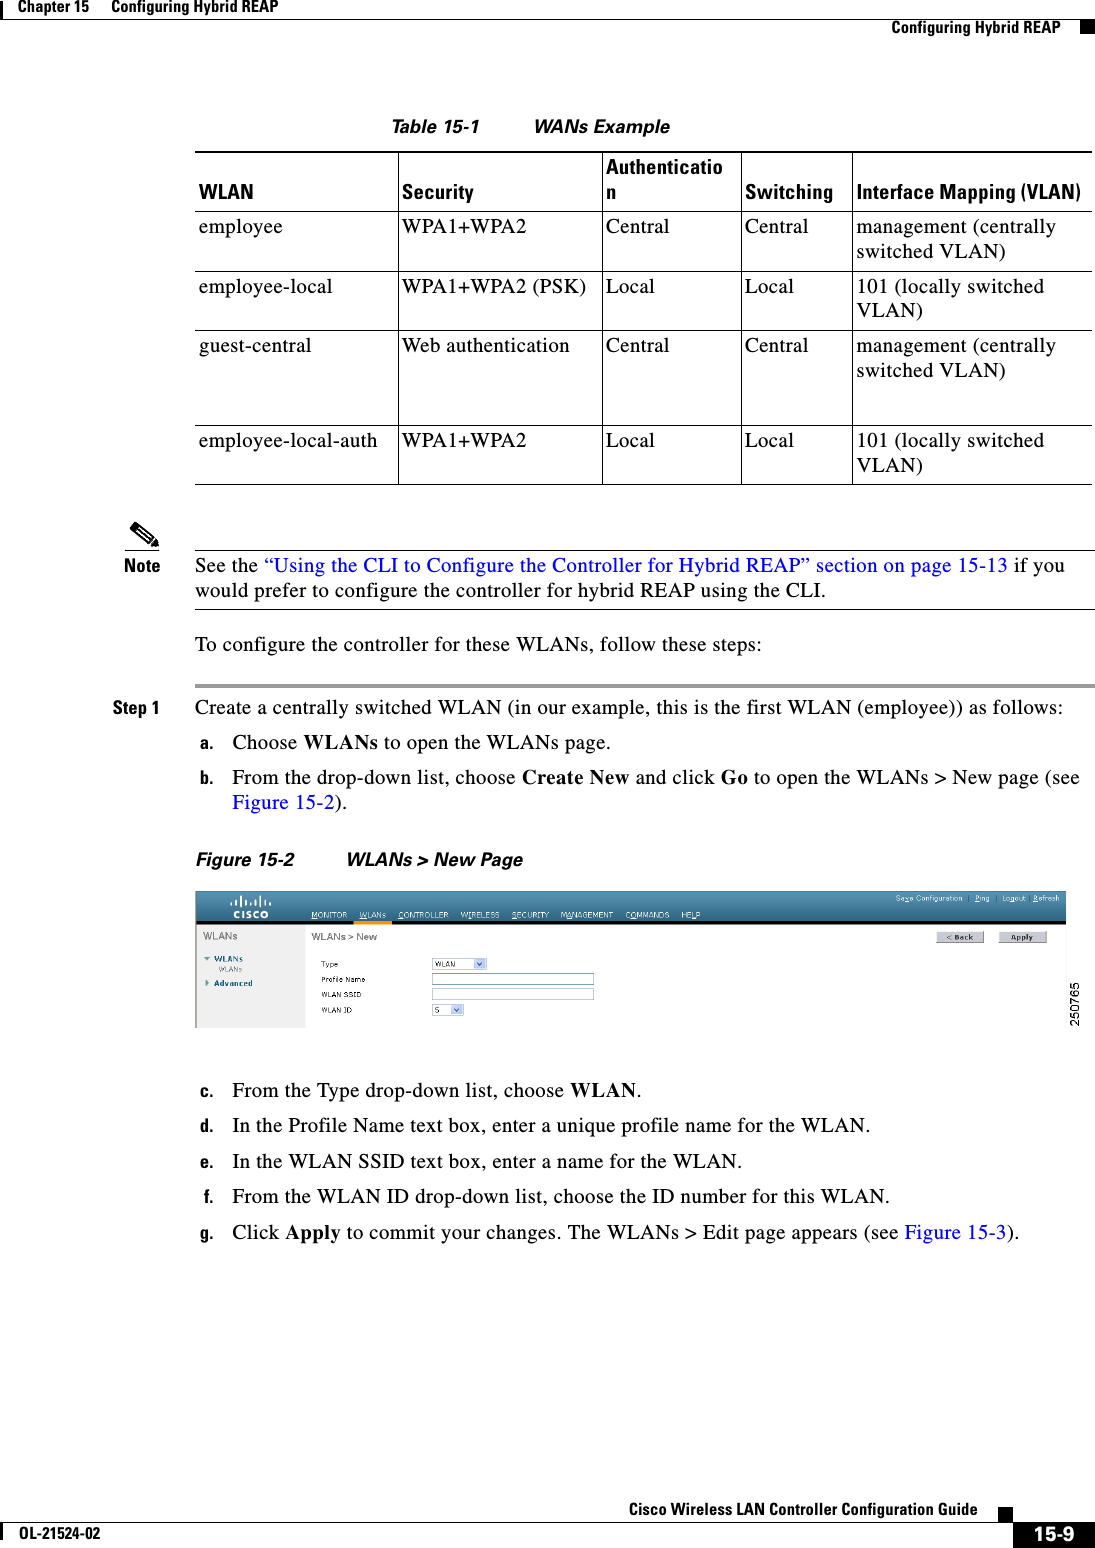  15-9Cisco Wireless LAN Controller Configuration GuideOL-21524-02Chapter 15      Configuring Hybrid REAP  Configuring Hybrid REAPTa b l e  15-1 WANs ExampleNote See the “Using the CLI to Configure the Controller for Hybrid REAP” section on page 15-13 if you would prefer to configure the controller for hybrid REAP using the CLI.To configure the controller for these WLANs, follow these steps:Step 1 Create a centrally switched WLAN (in our example, this is the first WLAN (employee)) as follows:a. Choose WLANs to open the WLANs page.b. From the drop-down list, choose Create New and click Go to open the WLANs &gt; New page (see Figure 15-2).Figure 15-2 WLANs &gt; New Pagec. From the Type drop-down list, choose WLAN.d. In the Profile Name text box, enter a unique profile name for the WLAN.e. In the WLAN SSID text box, enter a name for the WLAN.f. From the WLAN ID drop-down list, choose the ID number for this WLAN.g. Click Apply to commit your changes. The WLANs &gt; Edit page appears (see Figure 15-3).WLAN SecurityAuthenticationSwitching Interface Mapping (VLAN)employee WPA1+WPA2 Central Central management (centrally switched VLAN)employee-local WPA1+WPA2 (PSK) Local Local 101 (locally switched VLAN)guest-central Web authentication Central Central management (centrally switched VLAN)employee-local-auth WPA1+WPA2 Local Local 101 (locally switched VLAN)